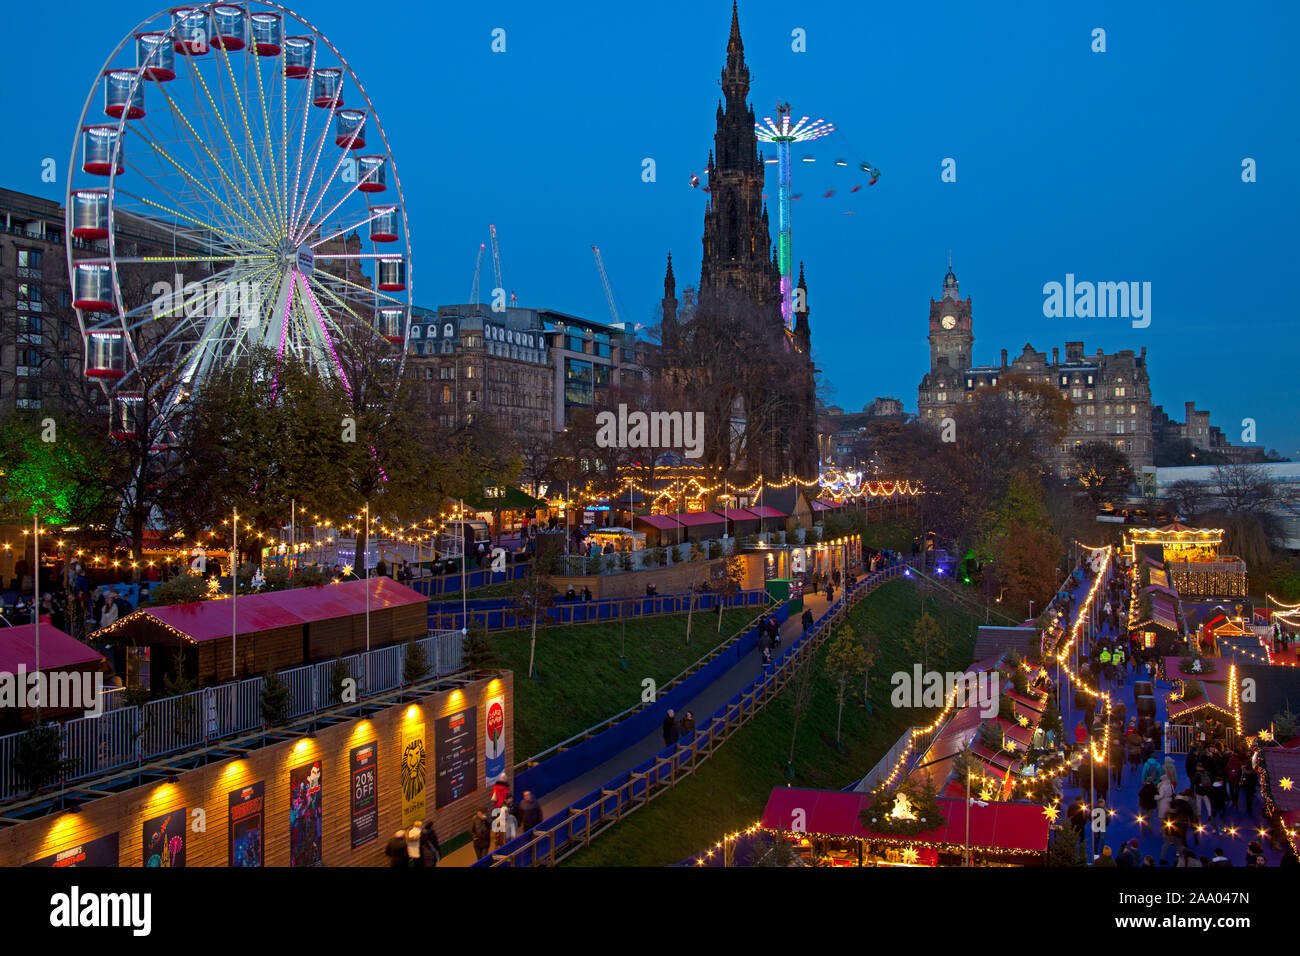 Princes Street Christmas Market and Fun Fair, Edinburgh, Scotland, United Kingdom. 18th Nov, 2019. Cold day but bright with temperature of 0 degrees by late afternoon, expected to drop to around minus 4 degrees overnight. Clear skies giving a beautiful twilight light to end the day. Stock Photo